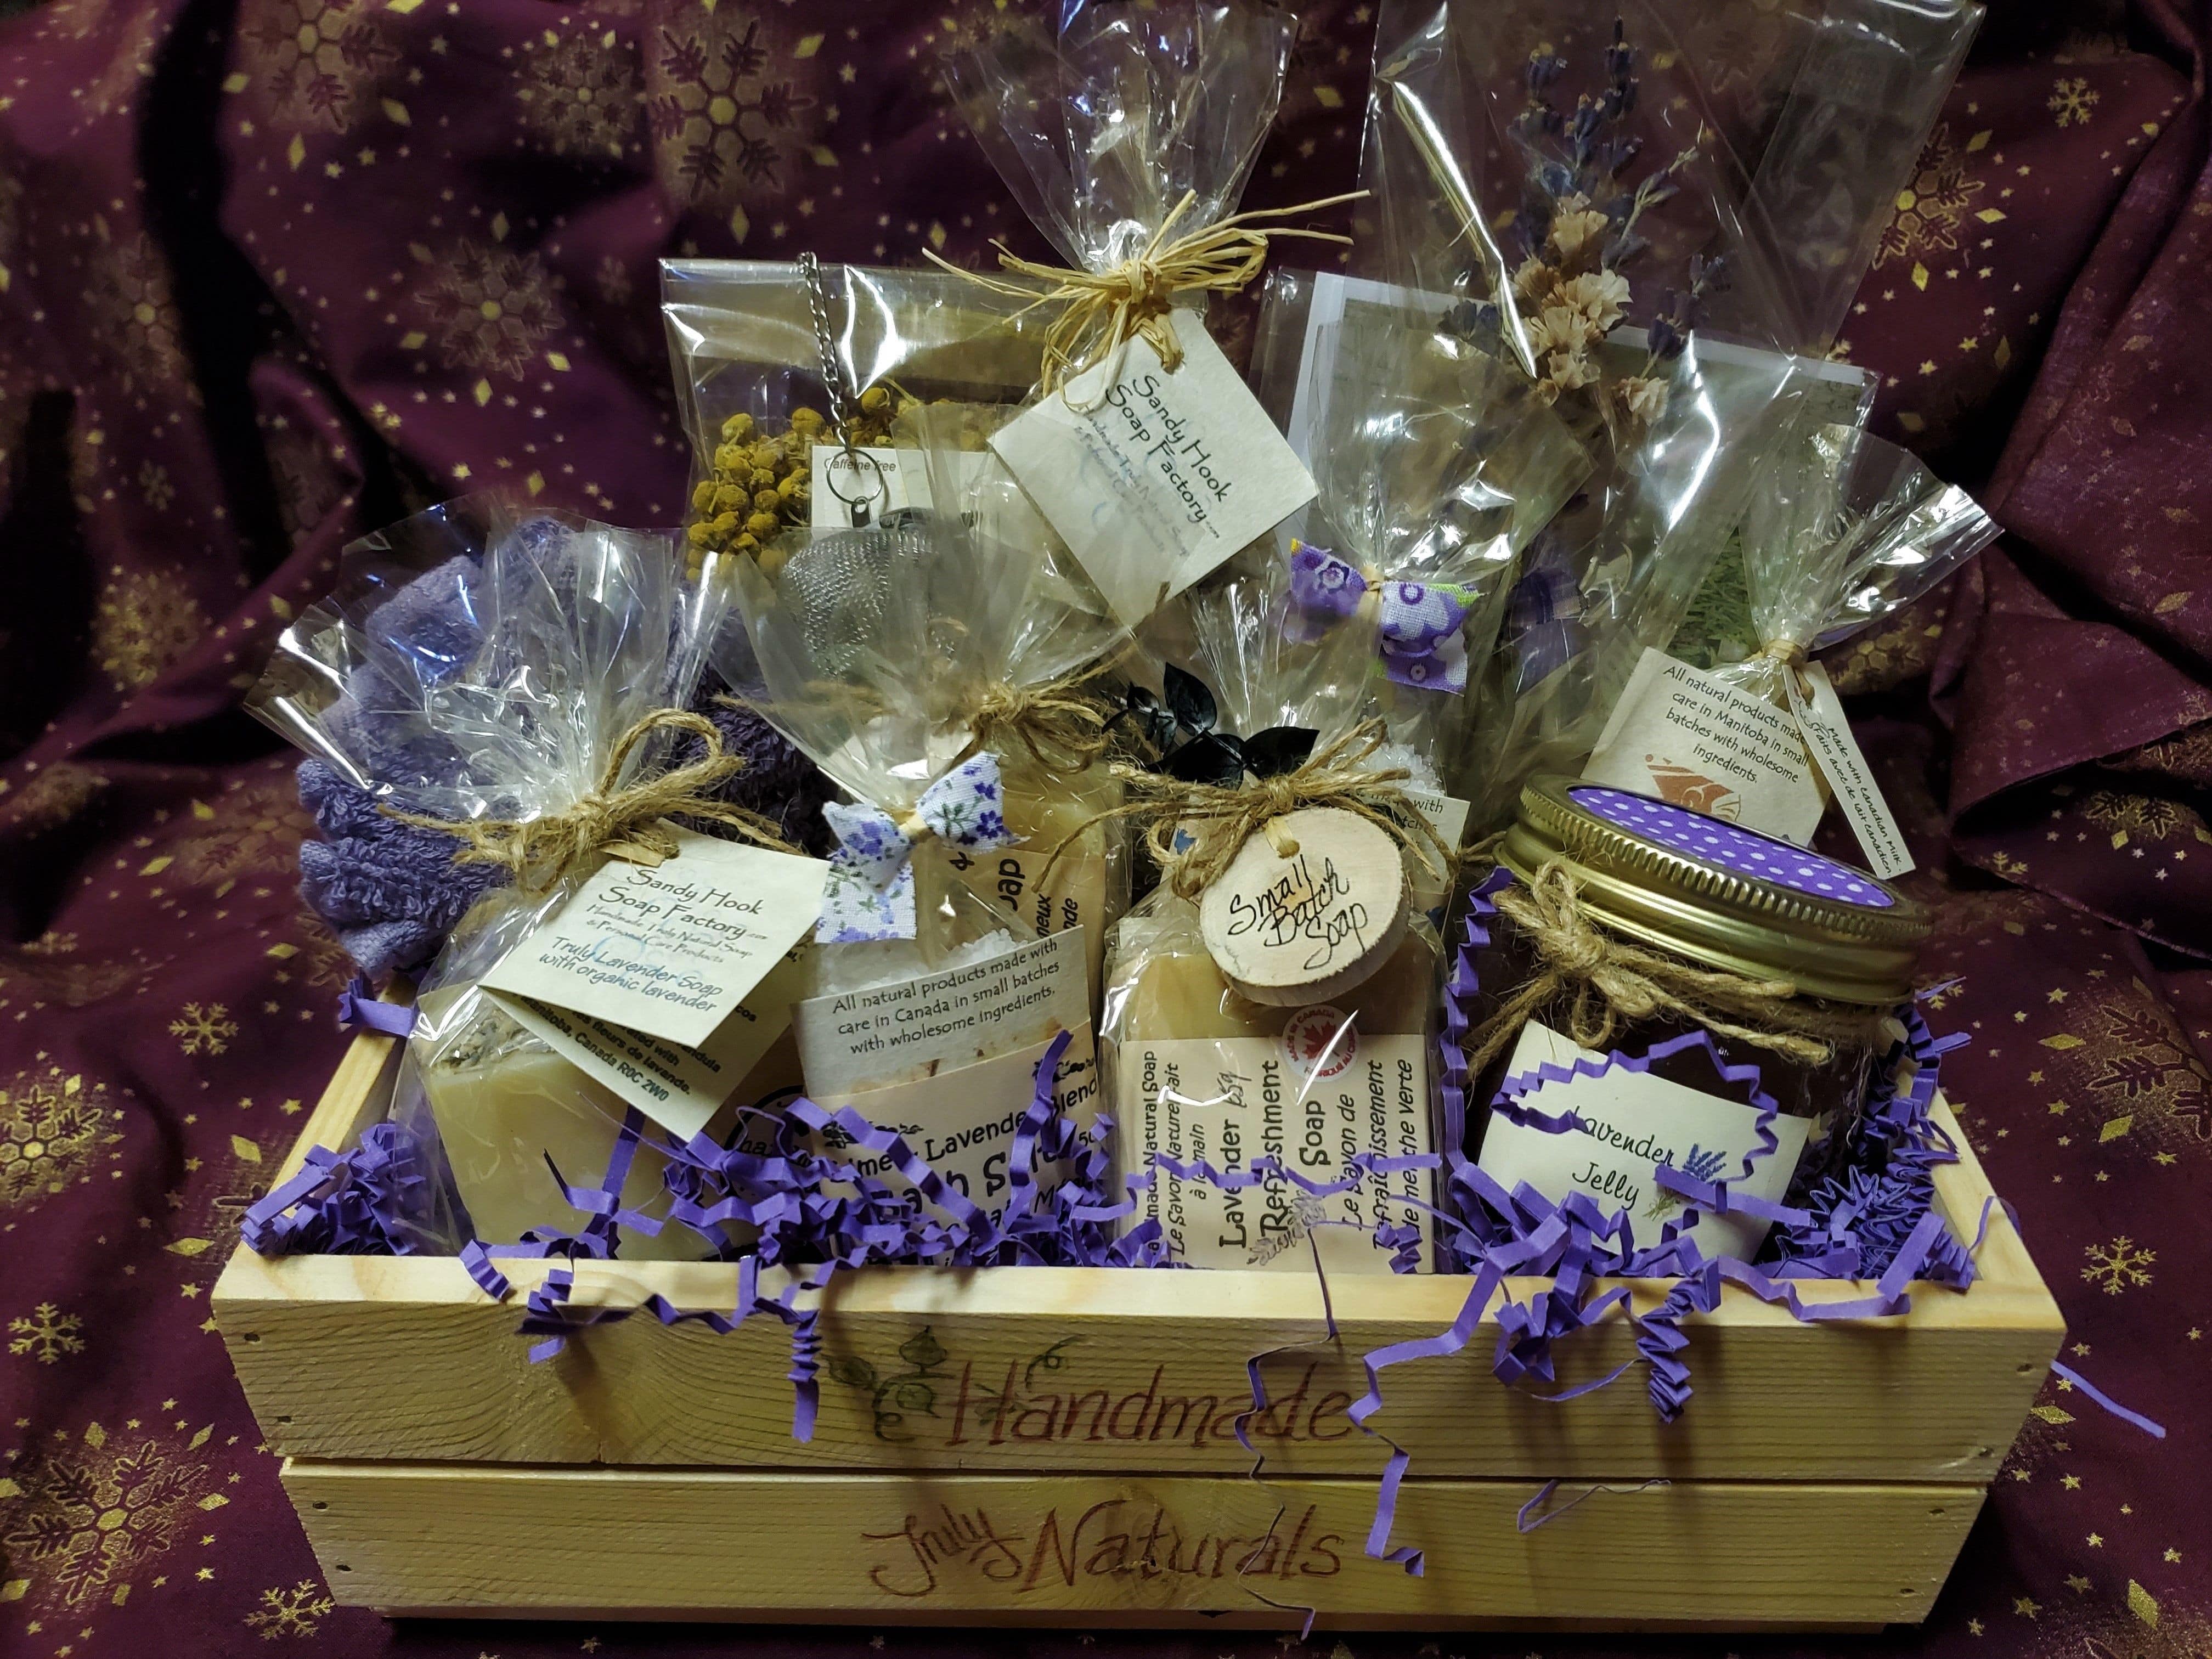 We are pleased to offer custom made wooden crate gift sets, give us a dollar amount and we will make a memorable gift. Great pricing, all handmade, 100% natural